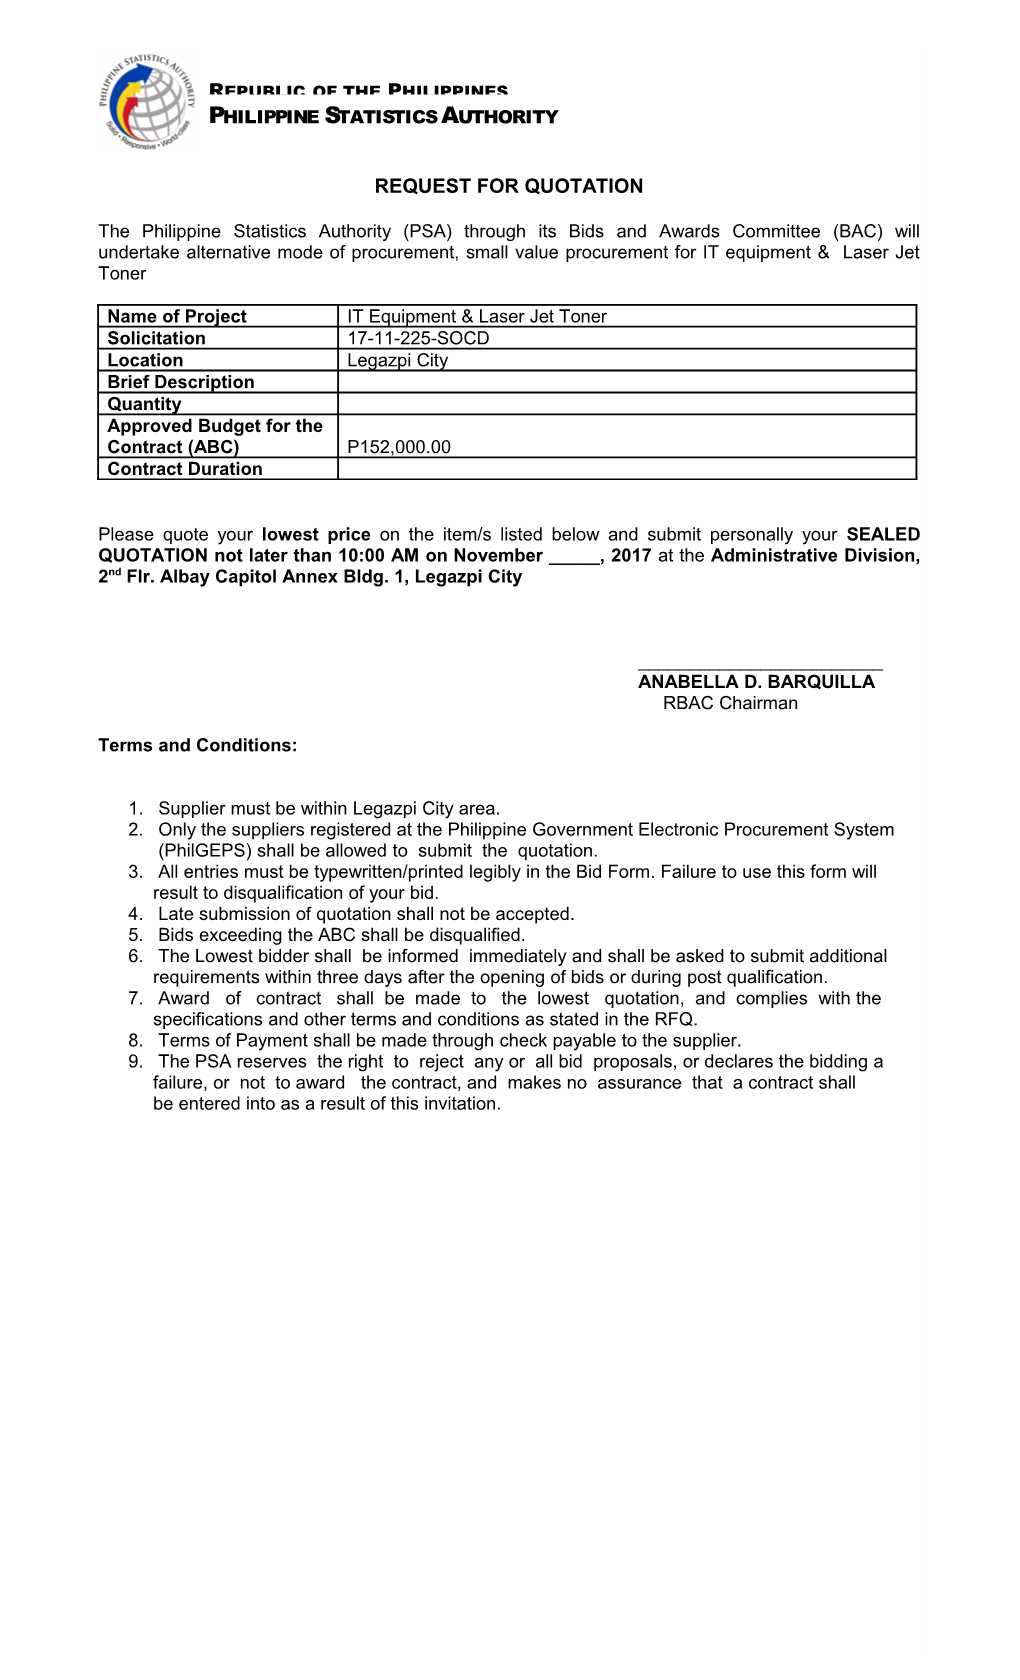 Request for Quotation s19